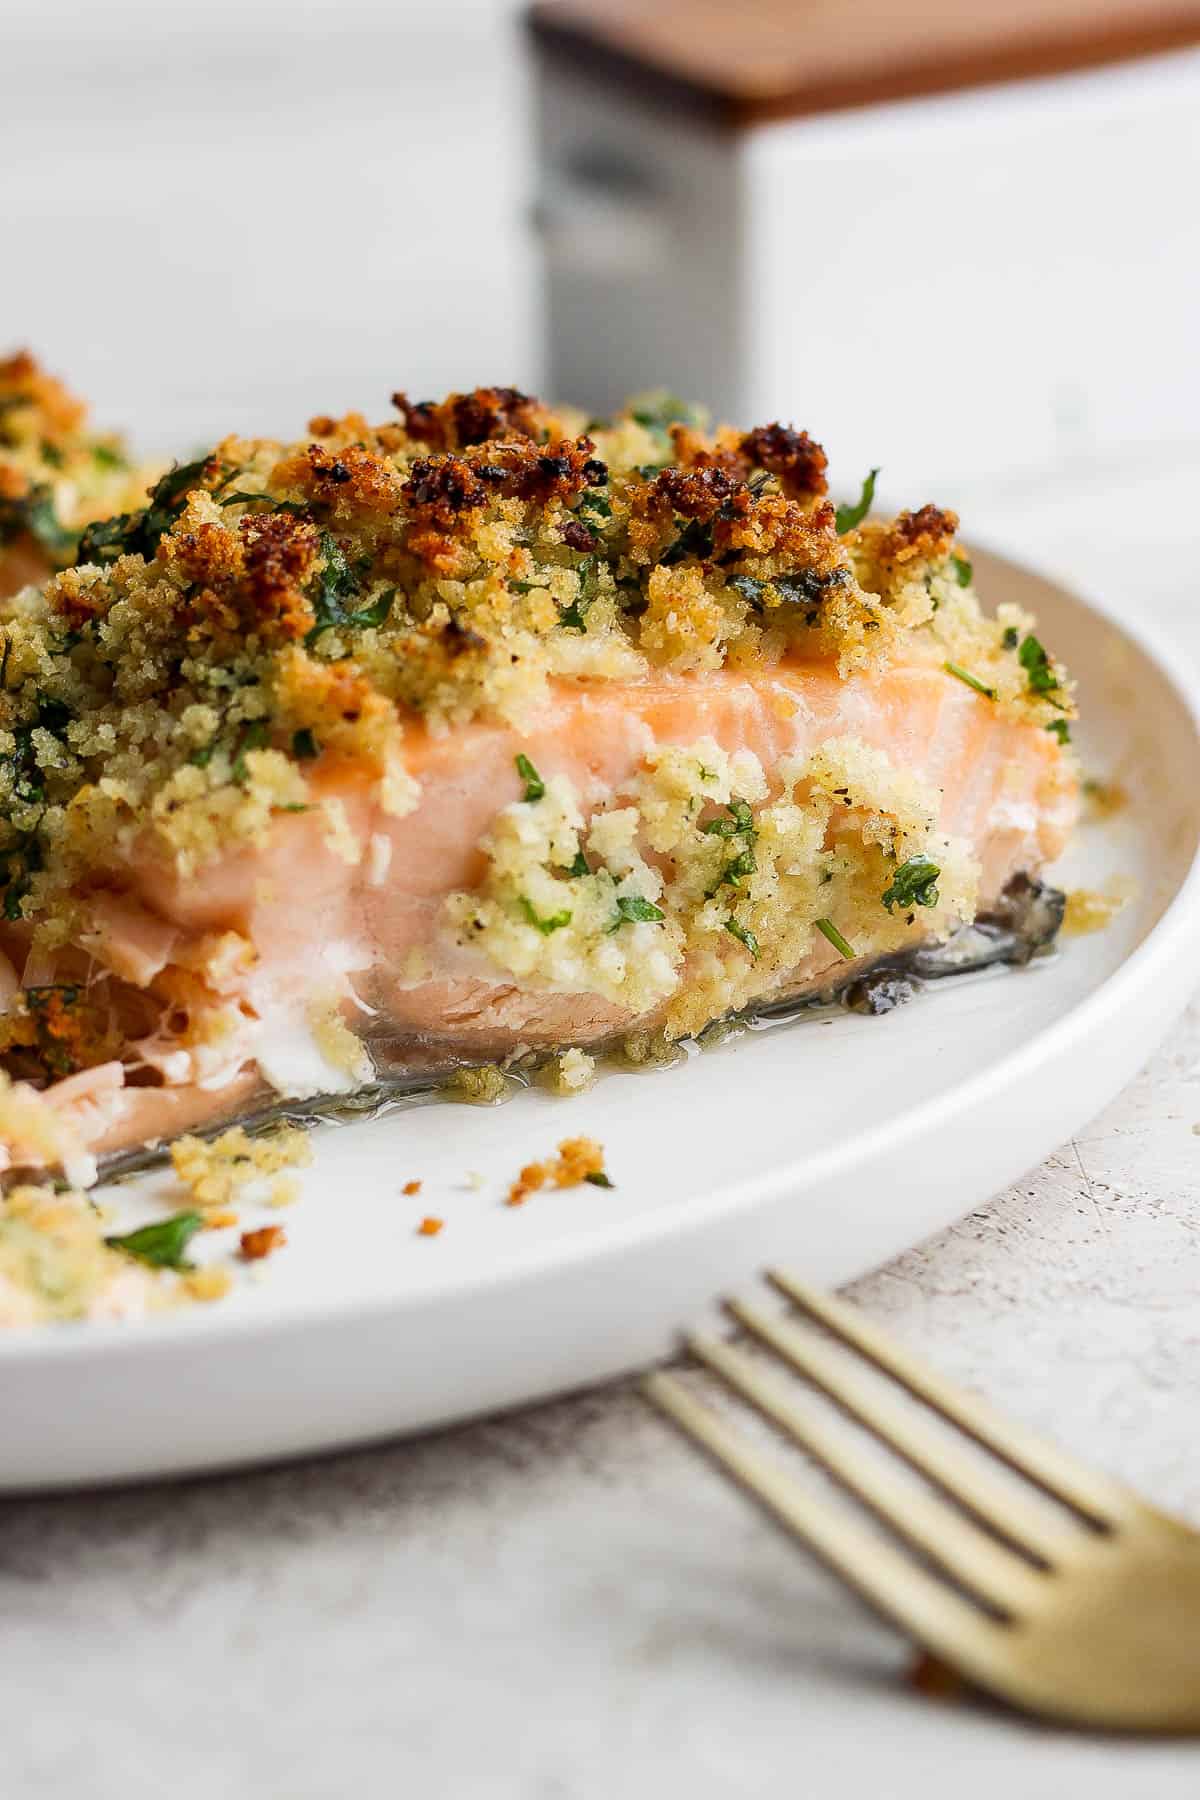 A panko crusted salmon fillet on a plate.